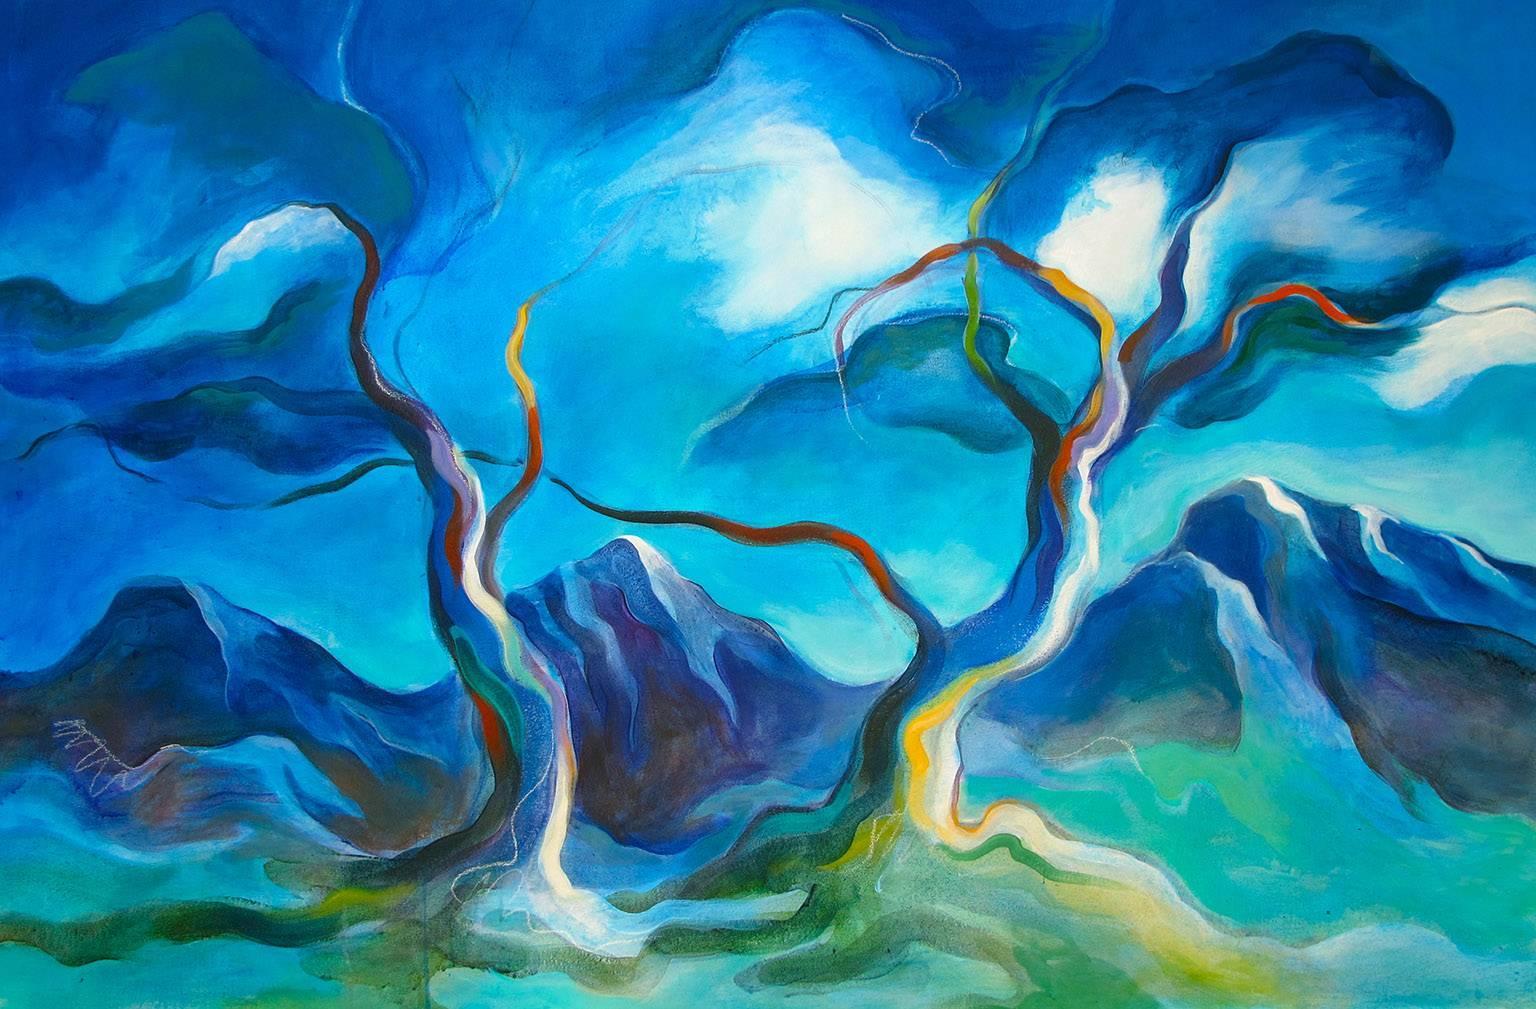 TREE SERIES: BLUE TREES, NIGHT dramatric  abstract landscape trees - Painting by Linda Jacobson